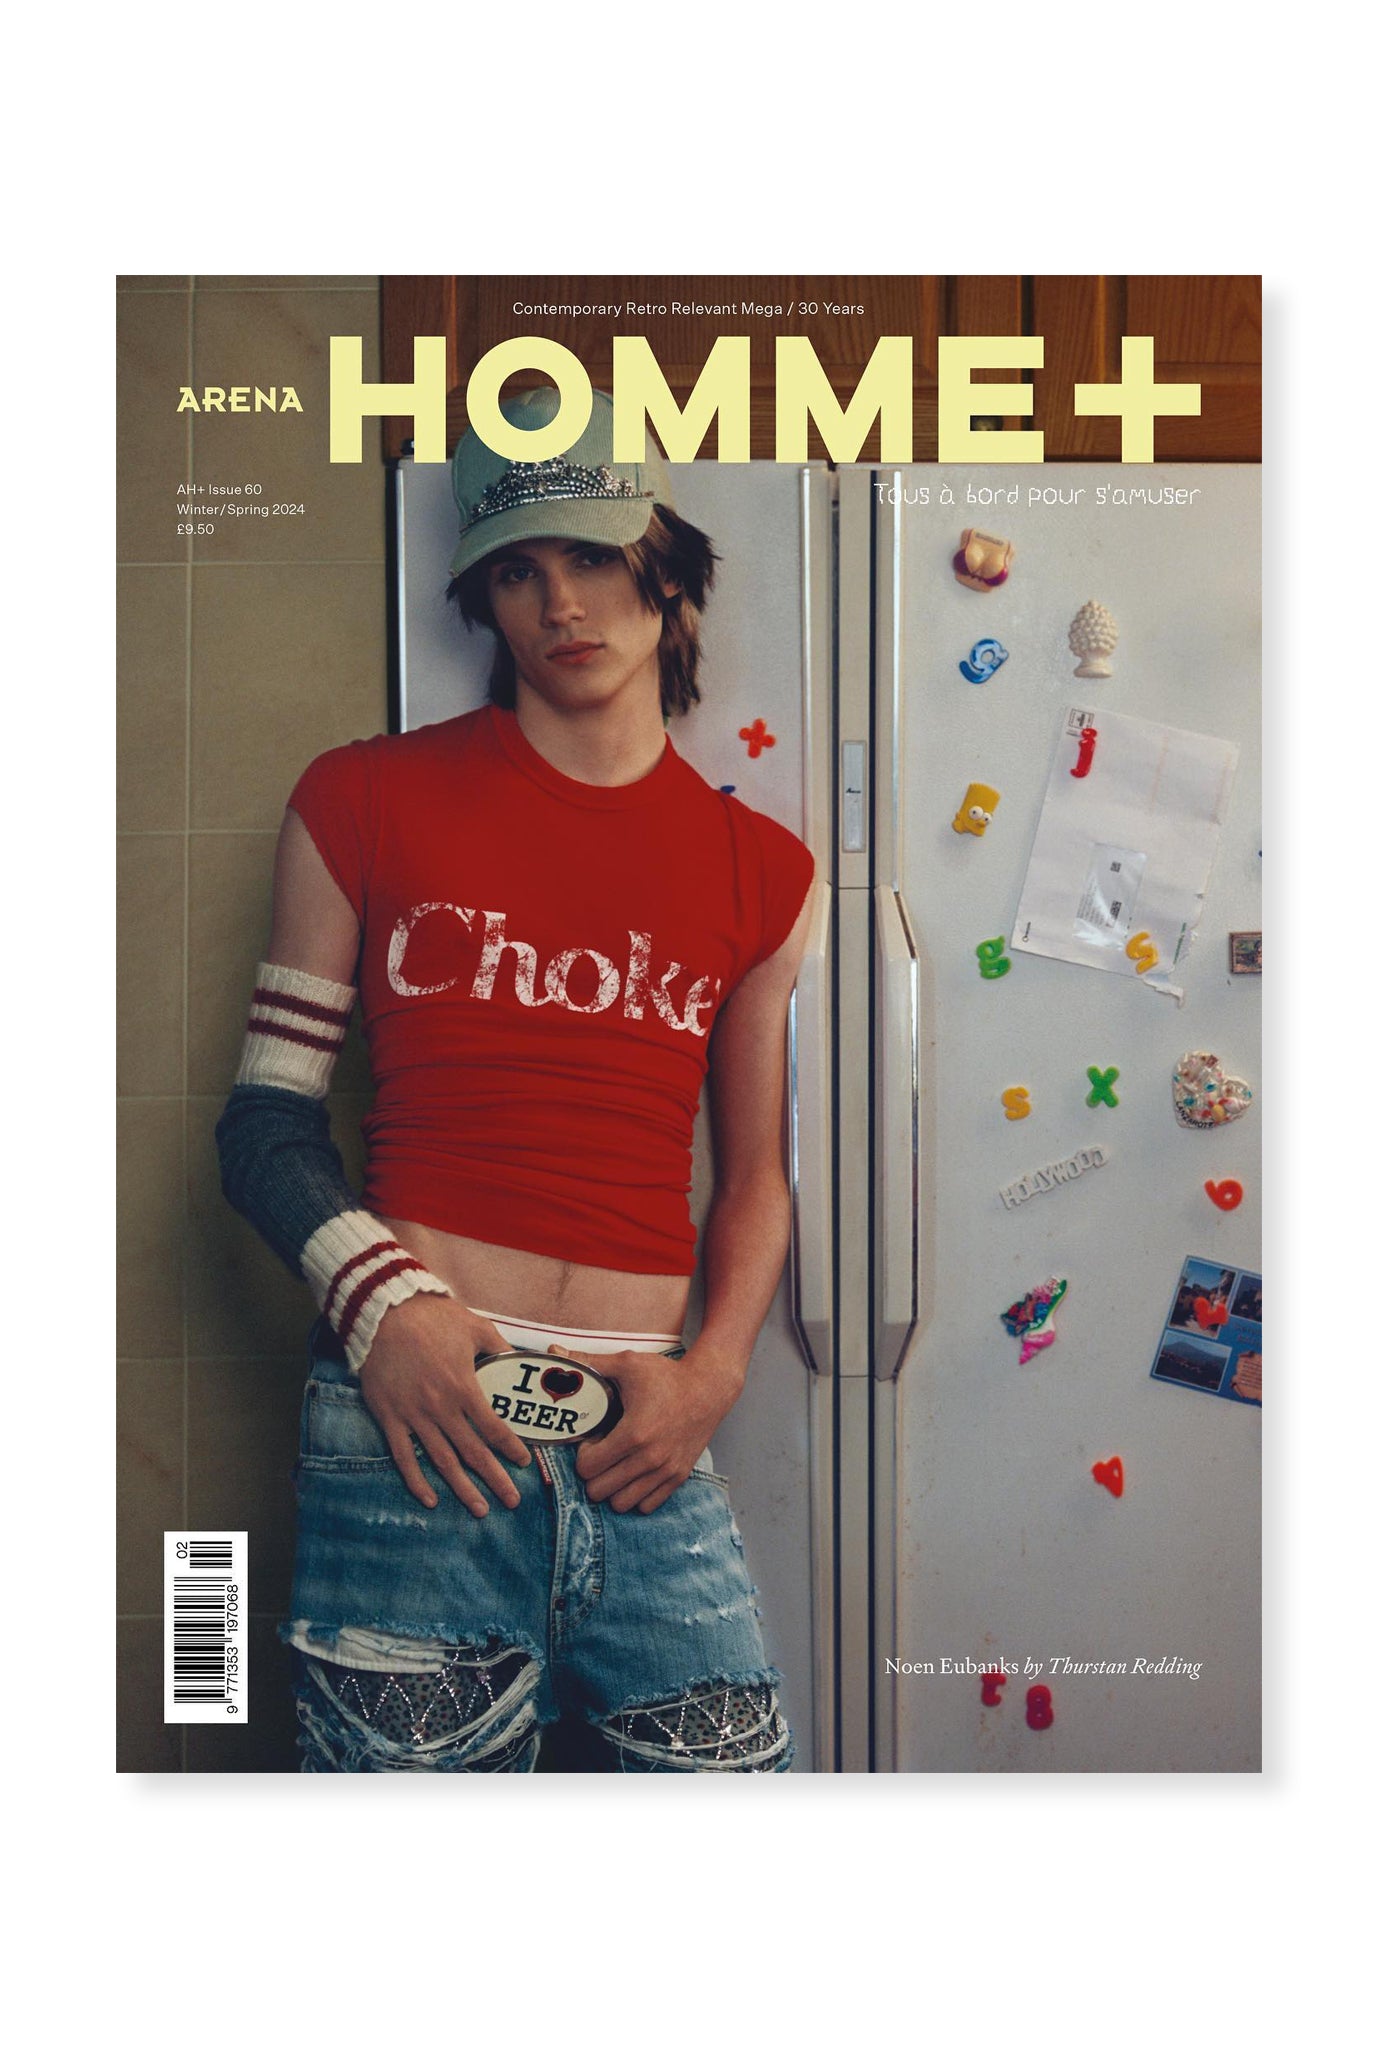 Arena Homme+, Issue 60